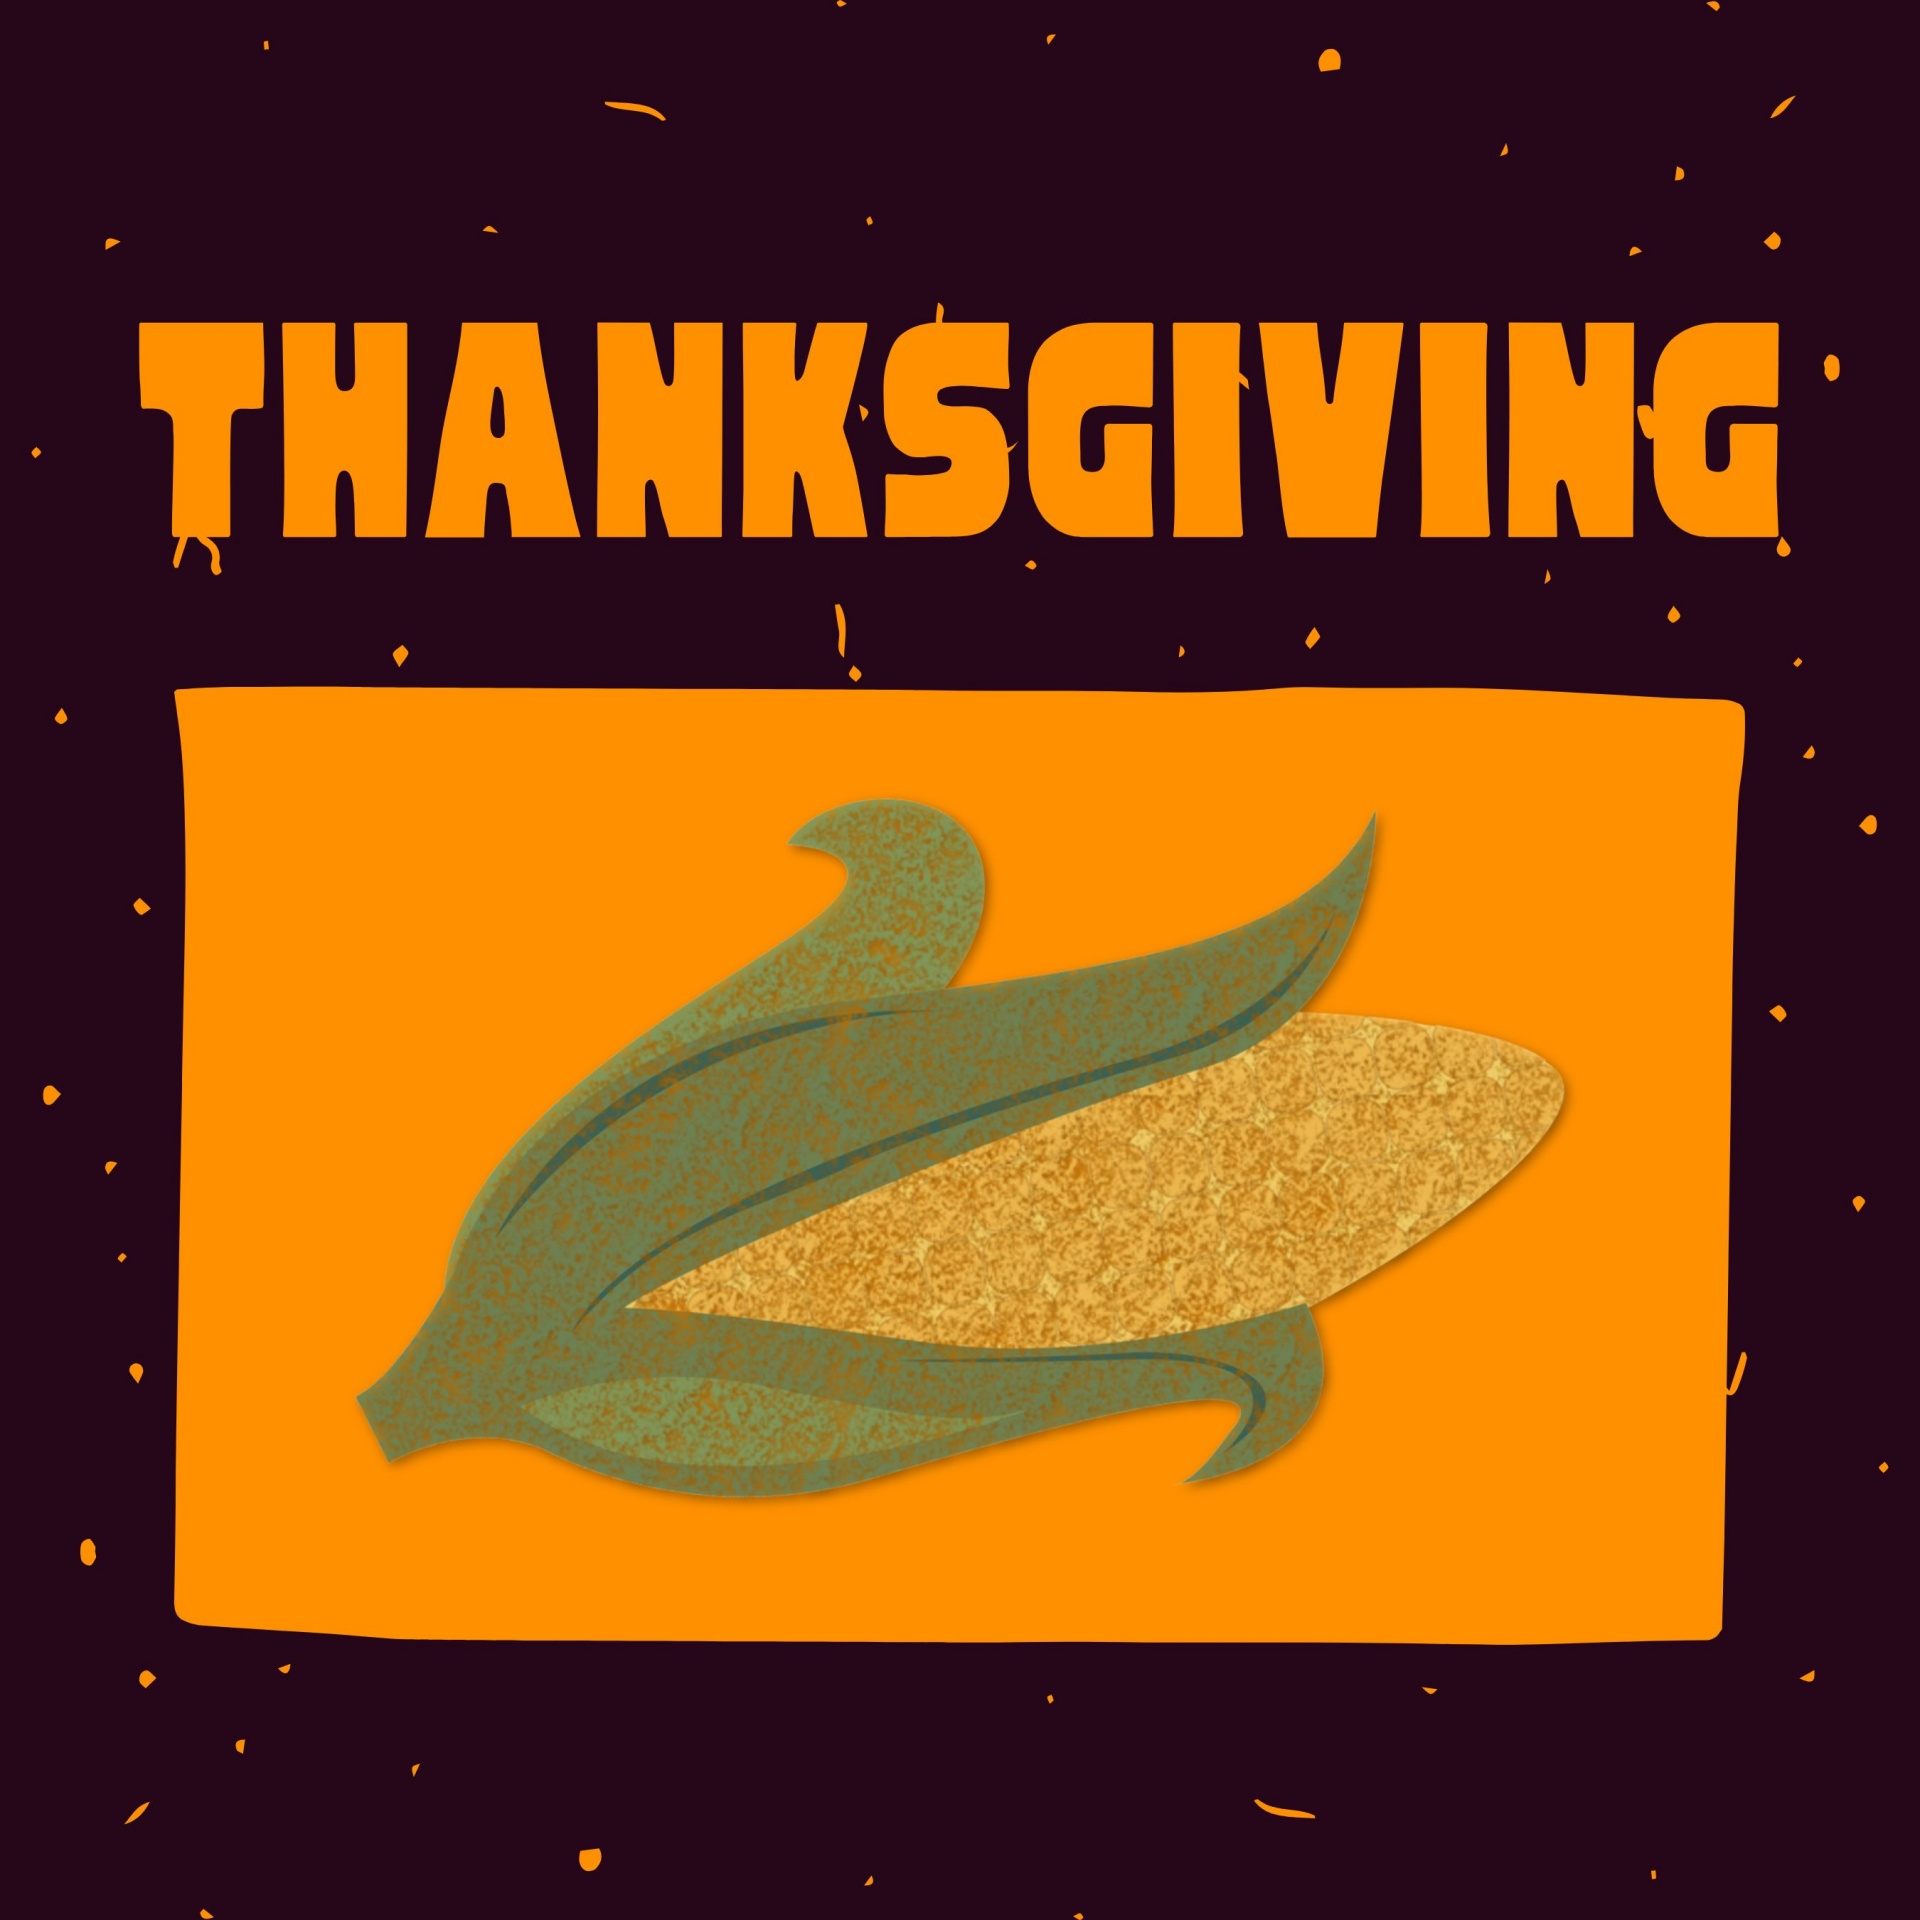 Thanksgiving illustration featuring an ear of corn